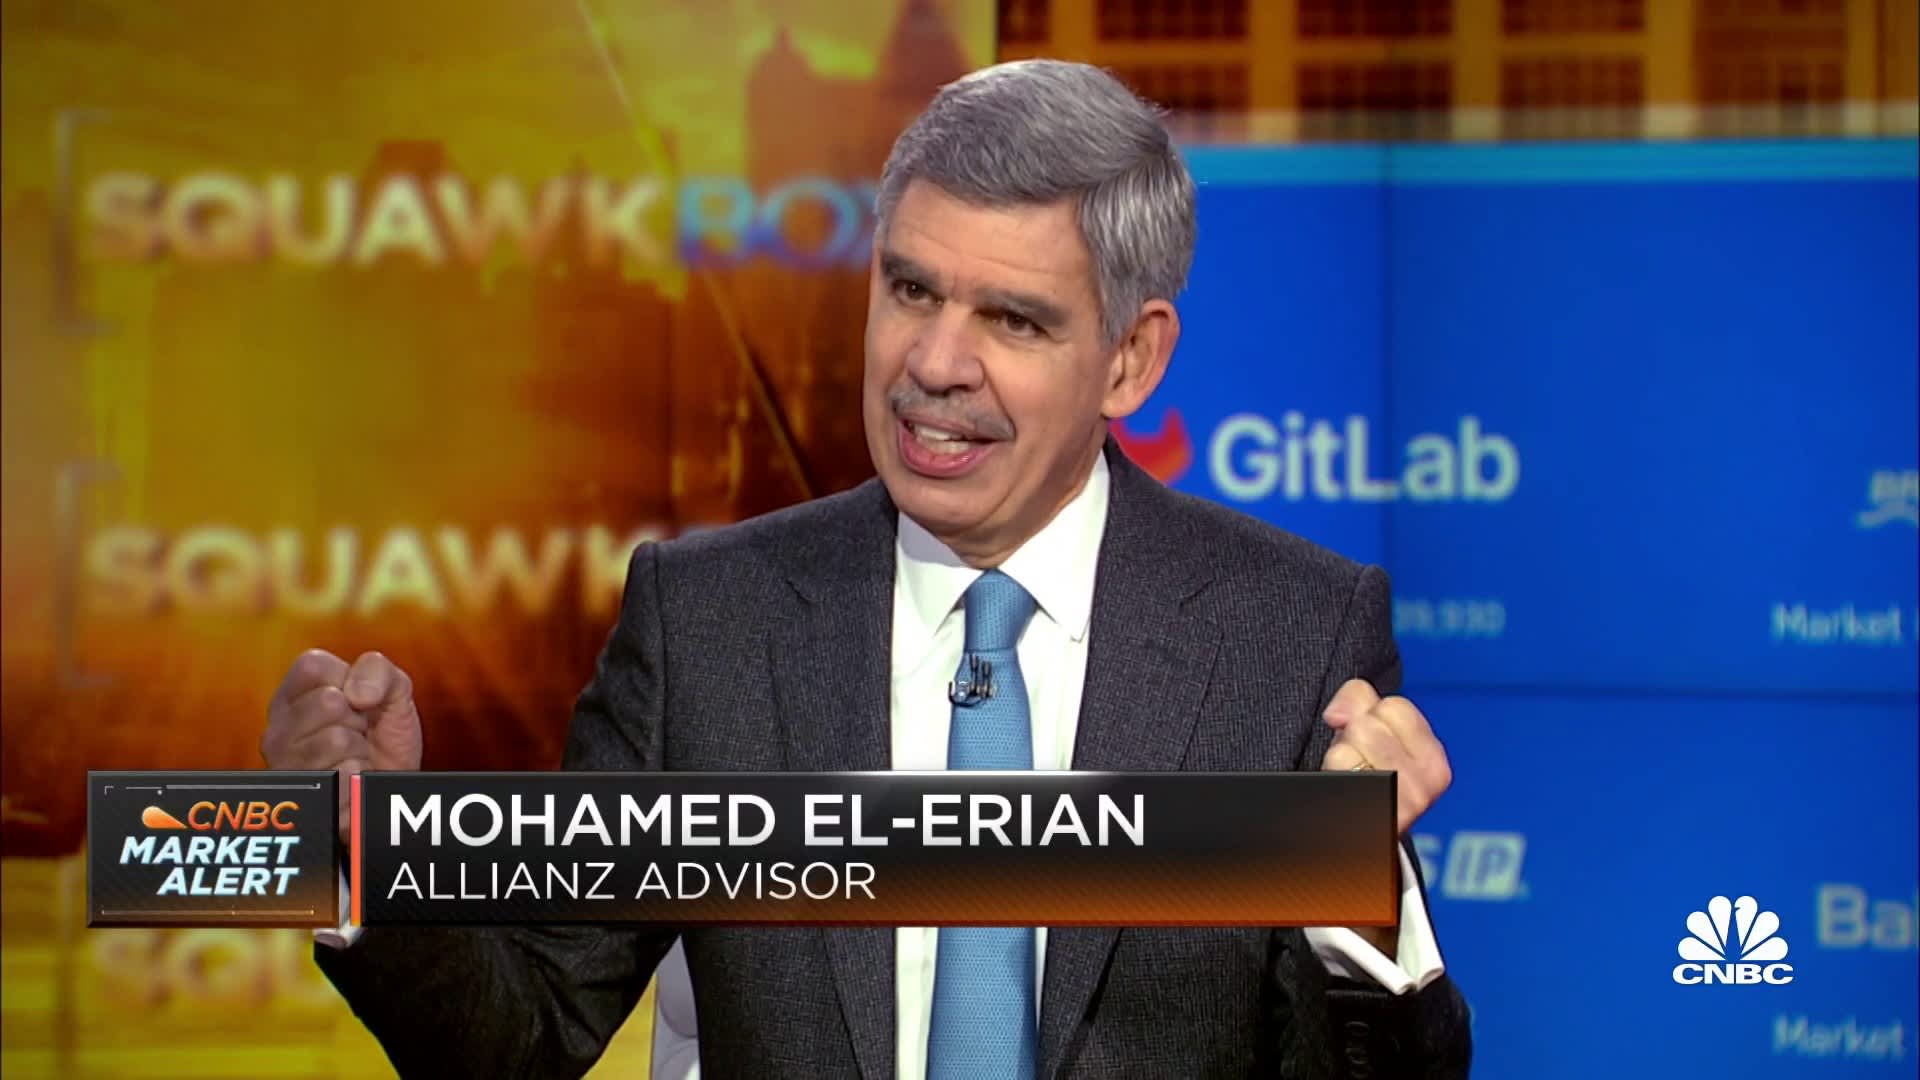 Investors moving to cash over worries that Fed will overdo rate hikes, says Mohamed El-Erian